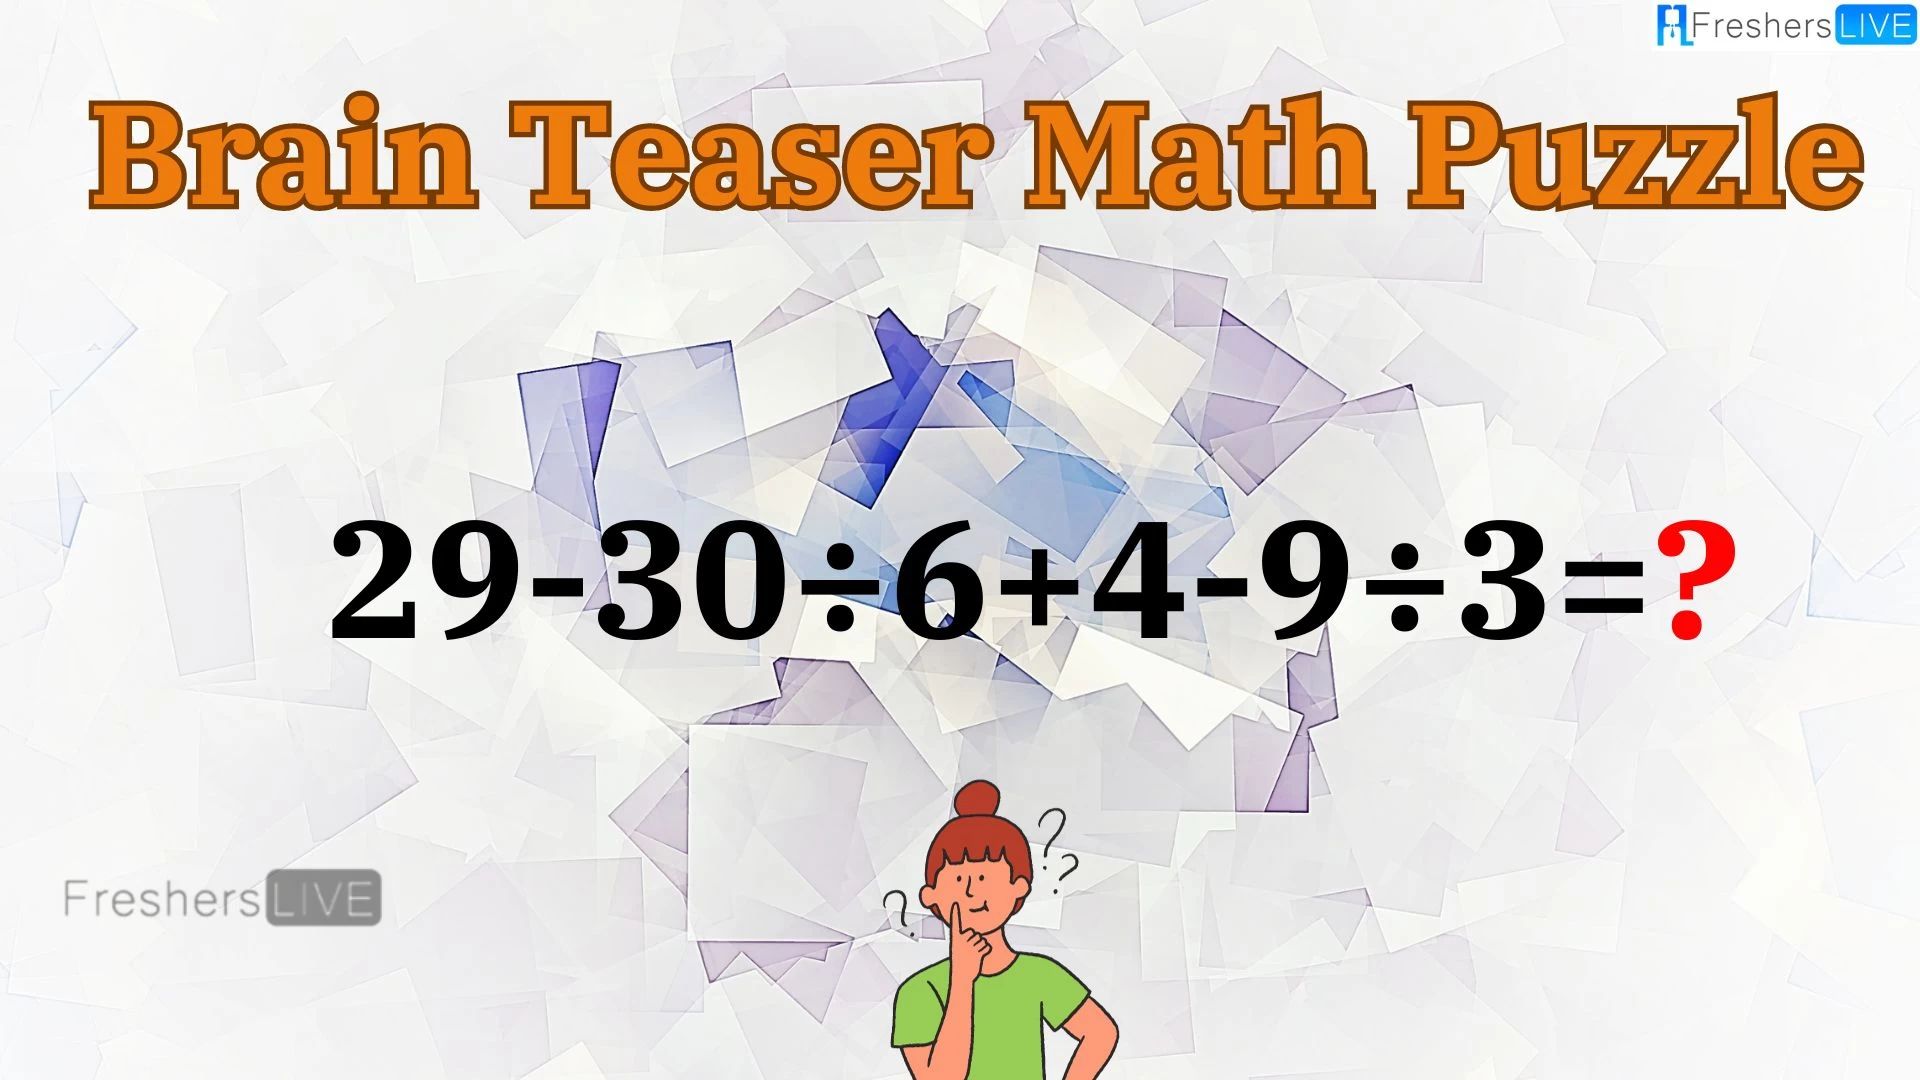 Can You Solve this Math Puzzle? Equate 29-30÷6+4-9÷3=?